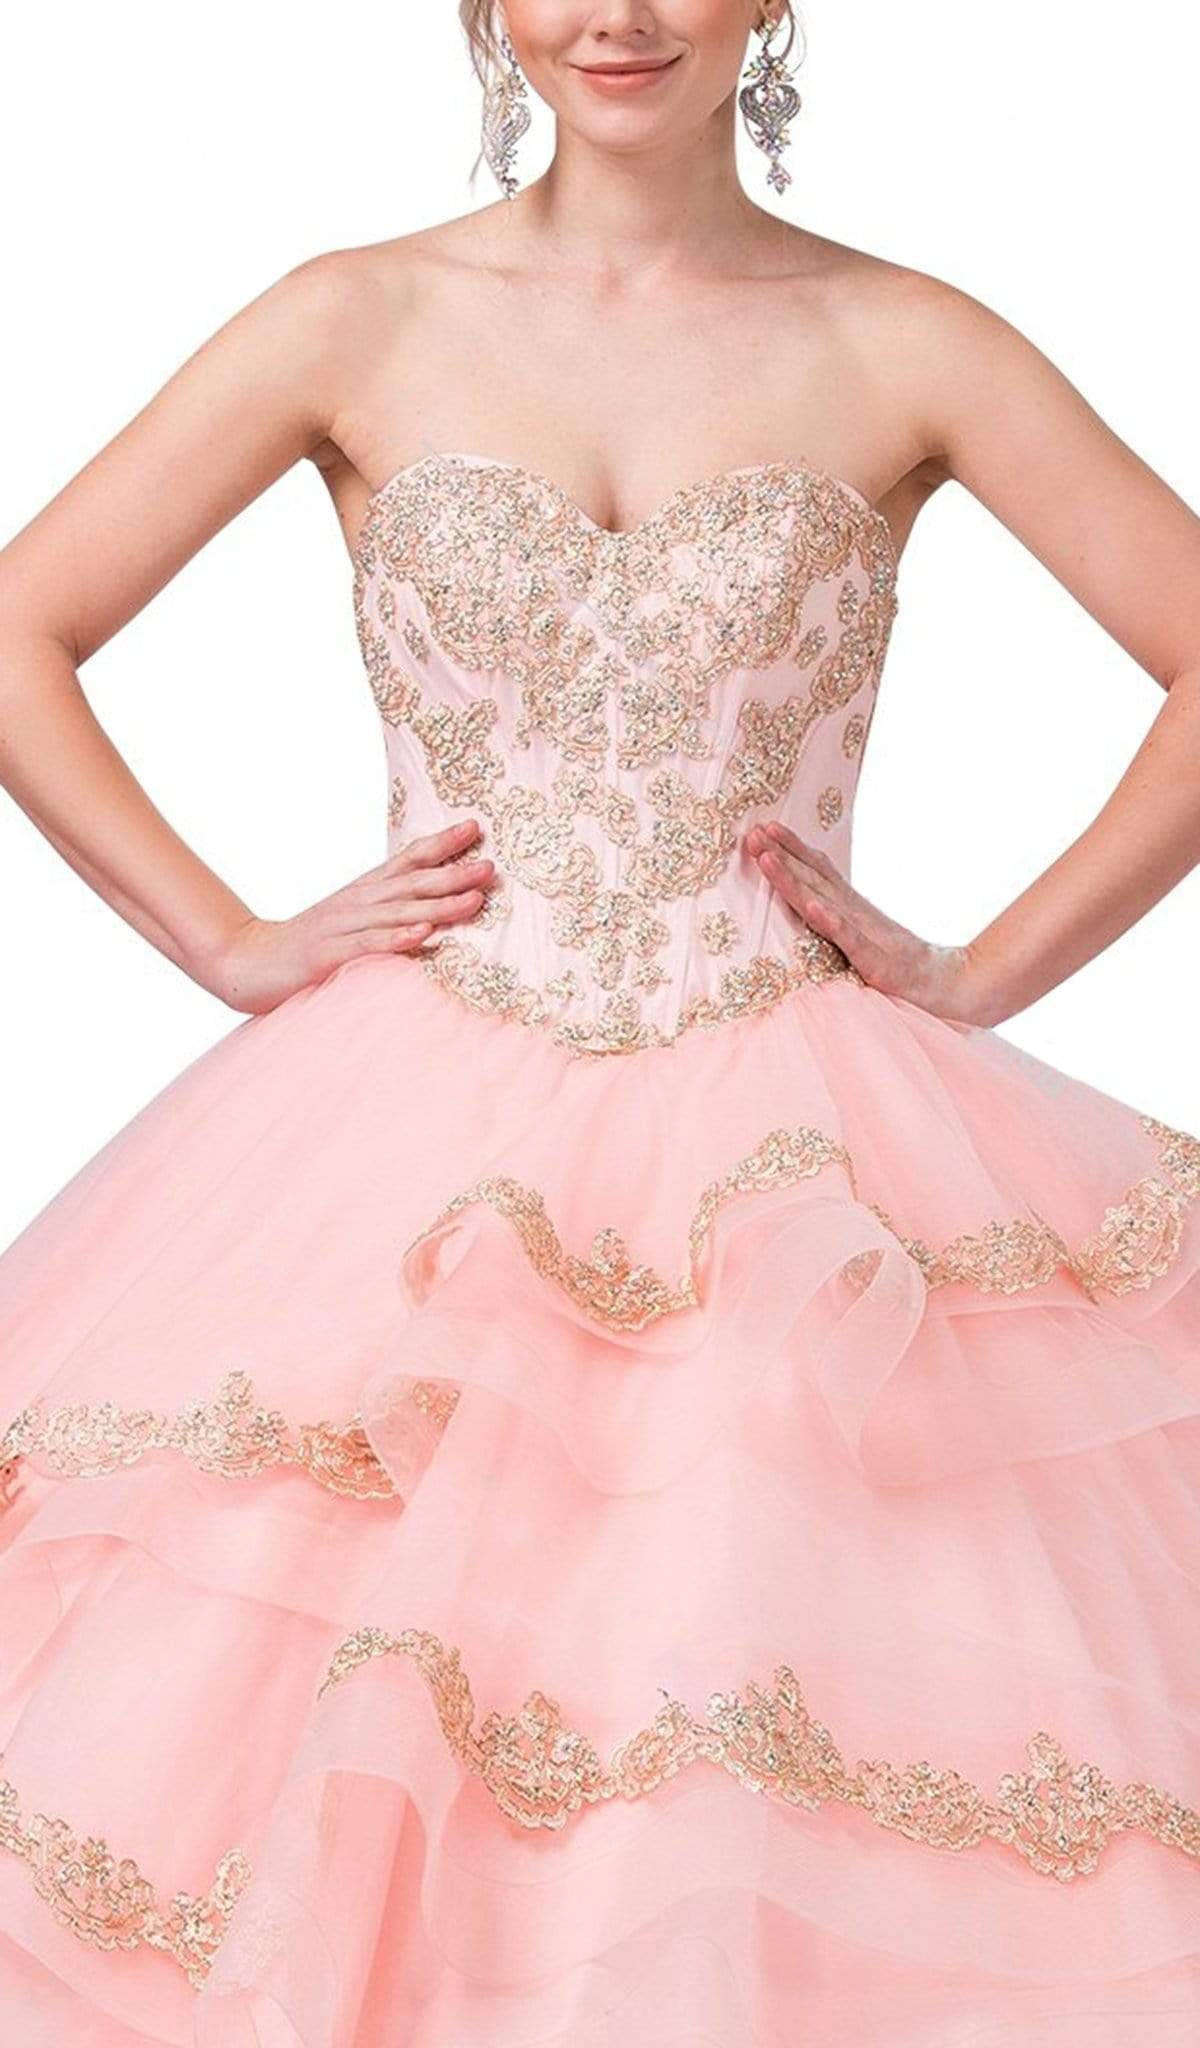 Dancing Queen - 1372 Gilt-Appliqued Corset Bodice Tiered Ballgown Special Occasion Dress